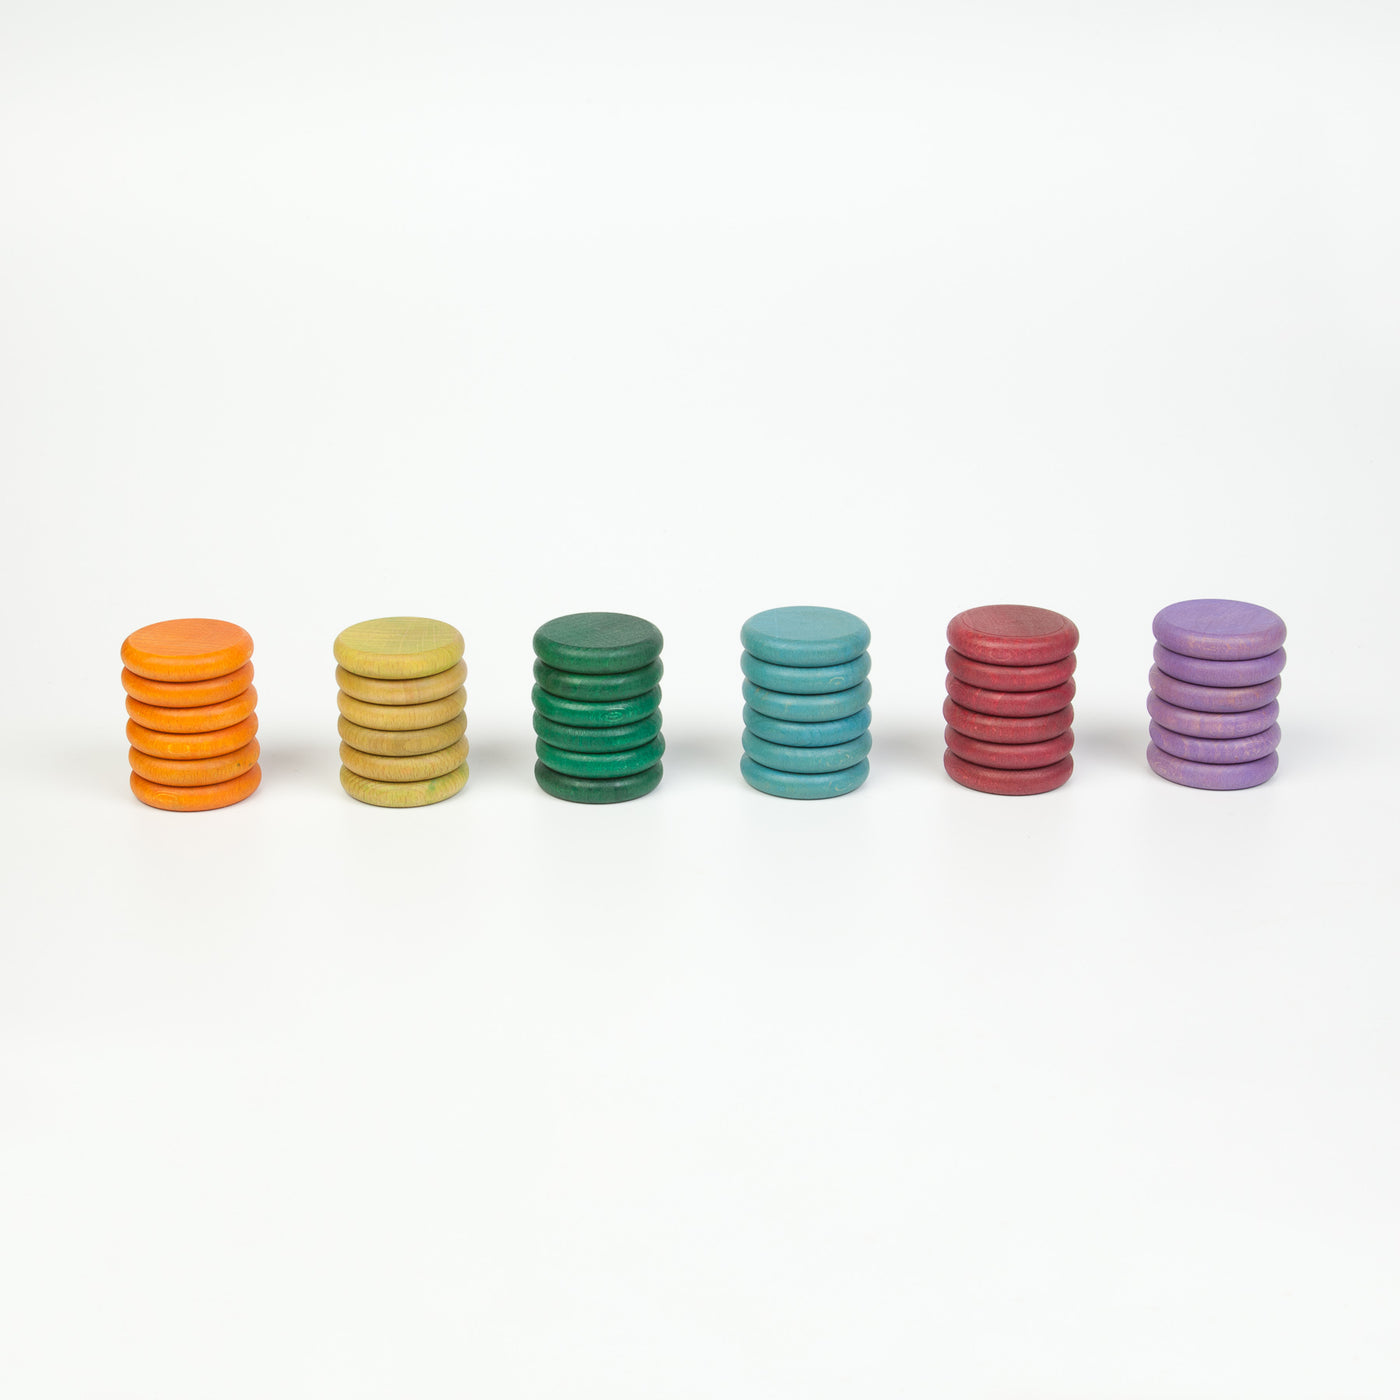 Grapat Coins (6 Additional Colours, 36 pieces)